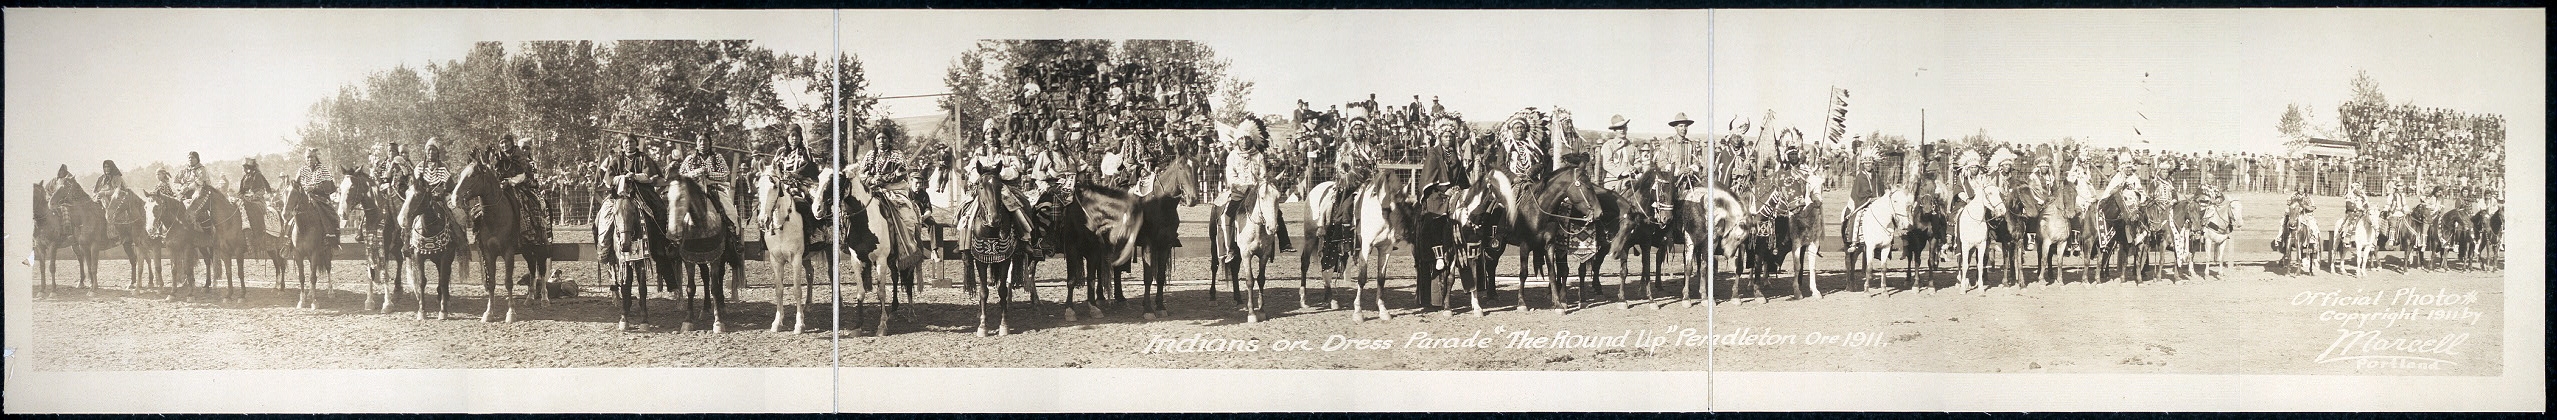 Indians on dress parade, "The Round-Up", Pendleton, Ore.,...